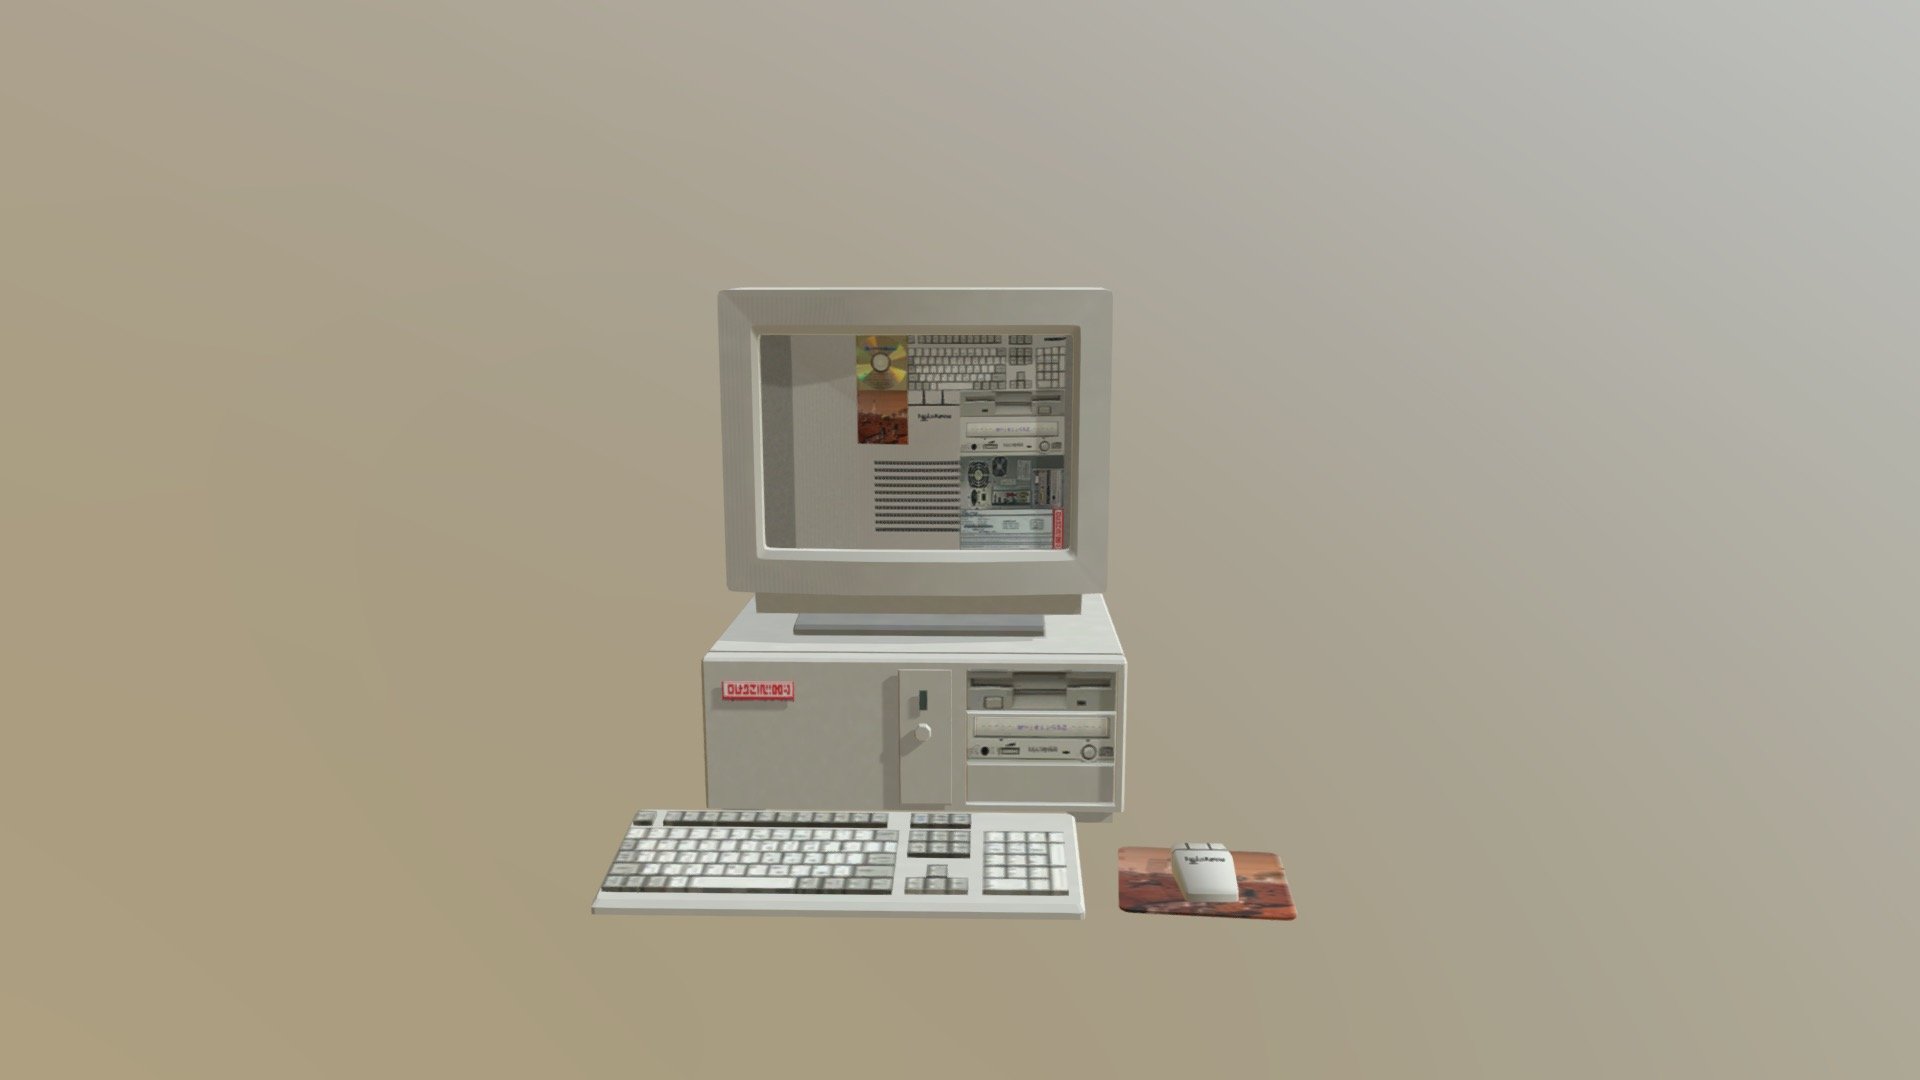 Old Computer